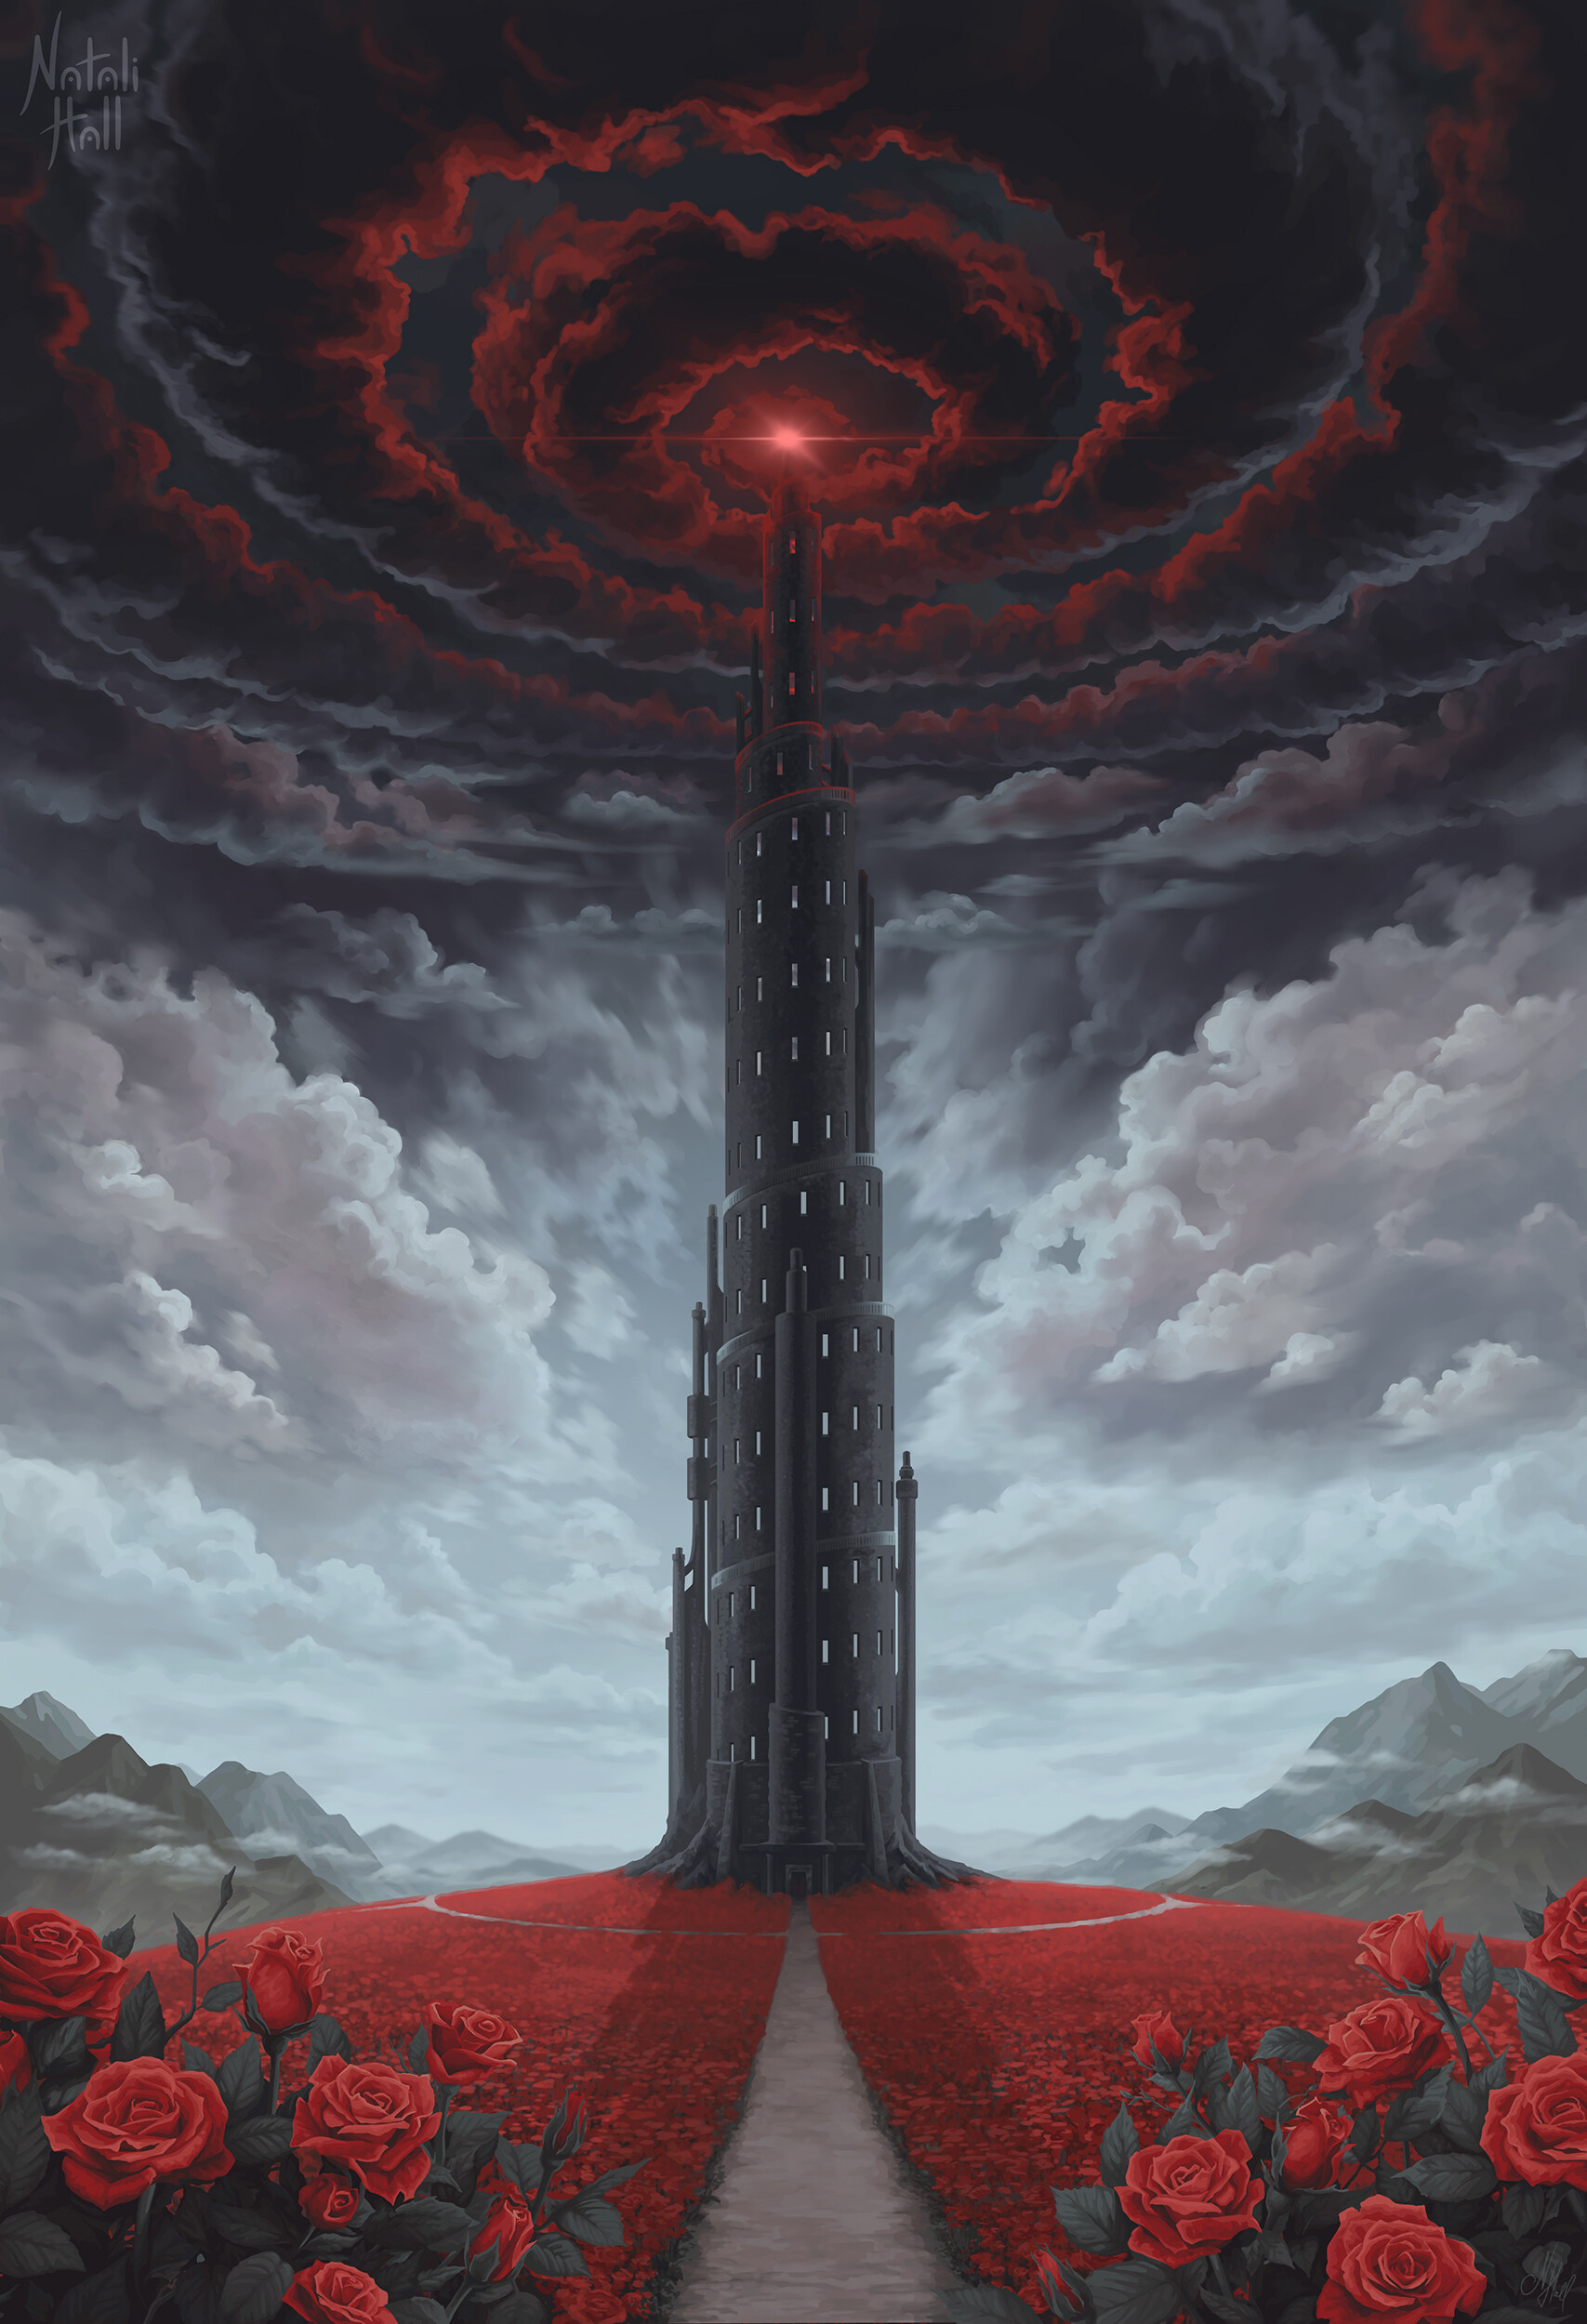 The Black Tower